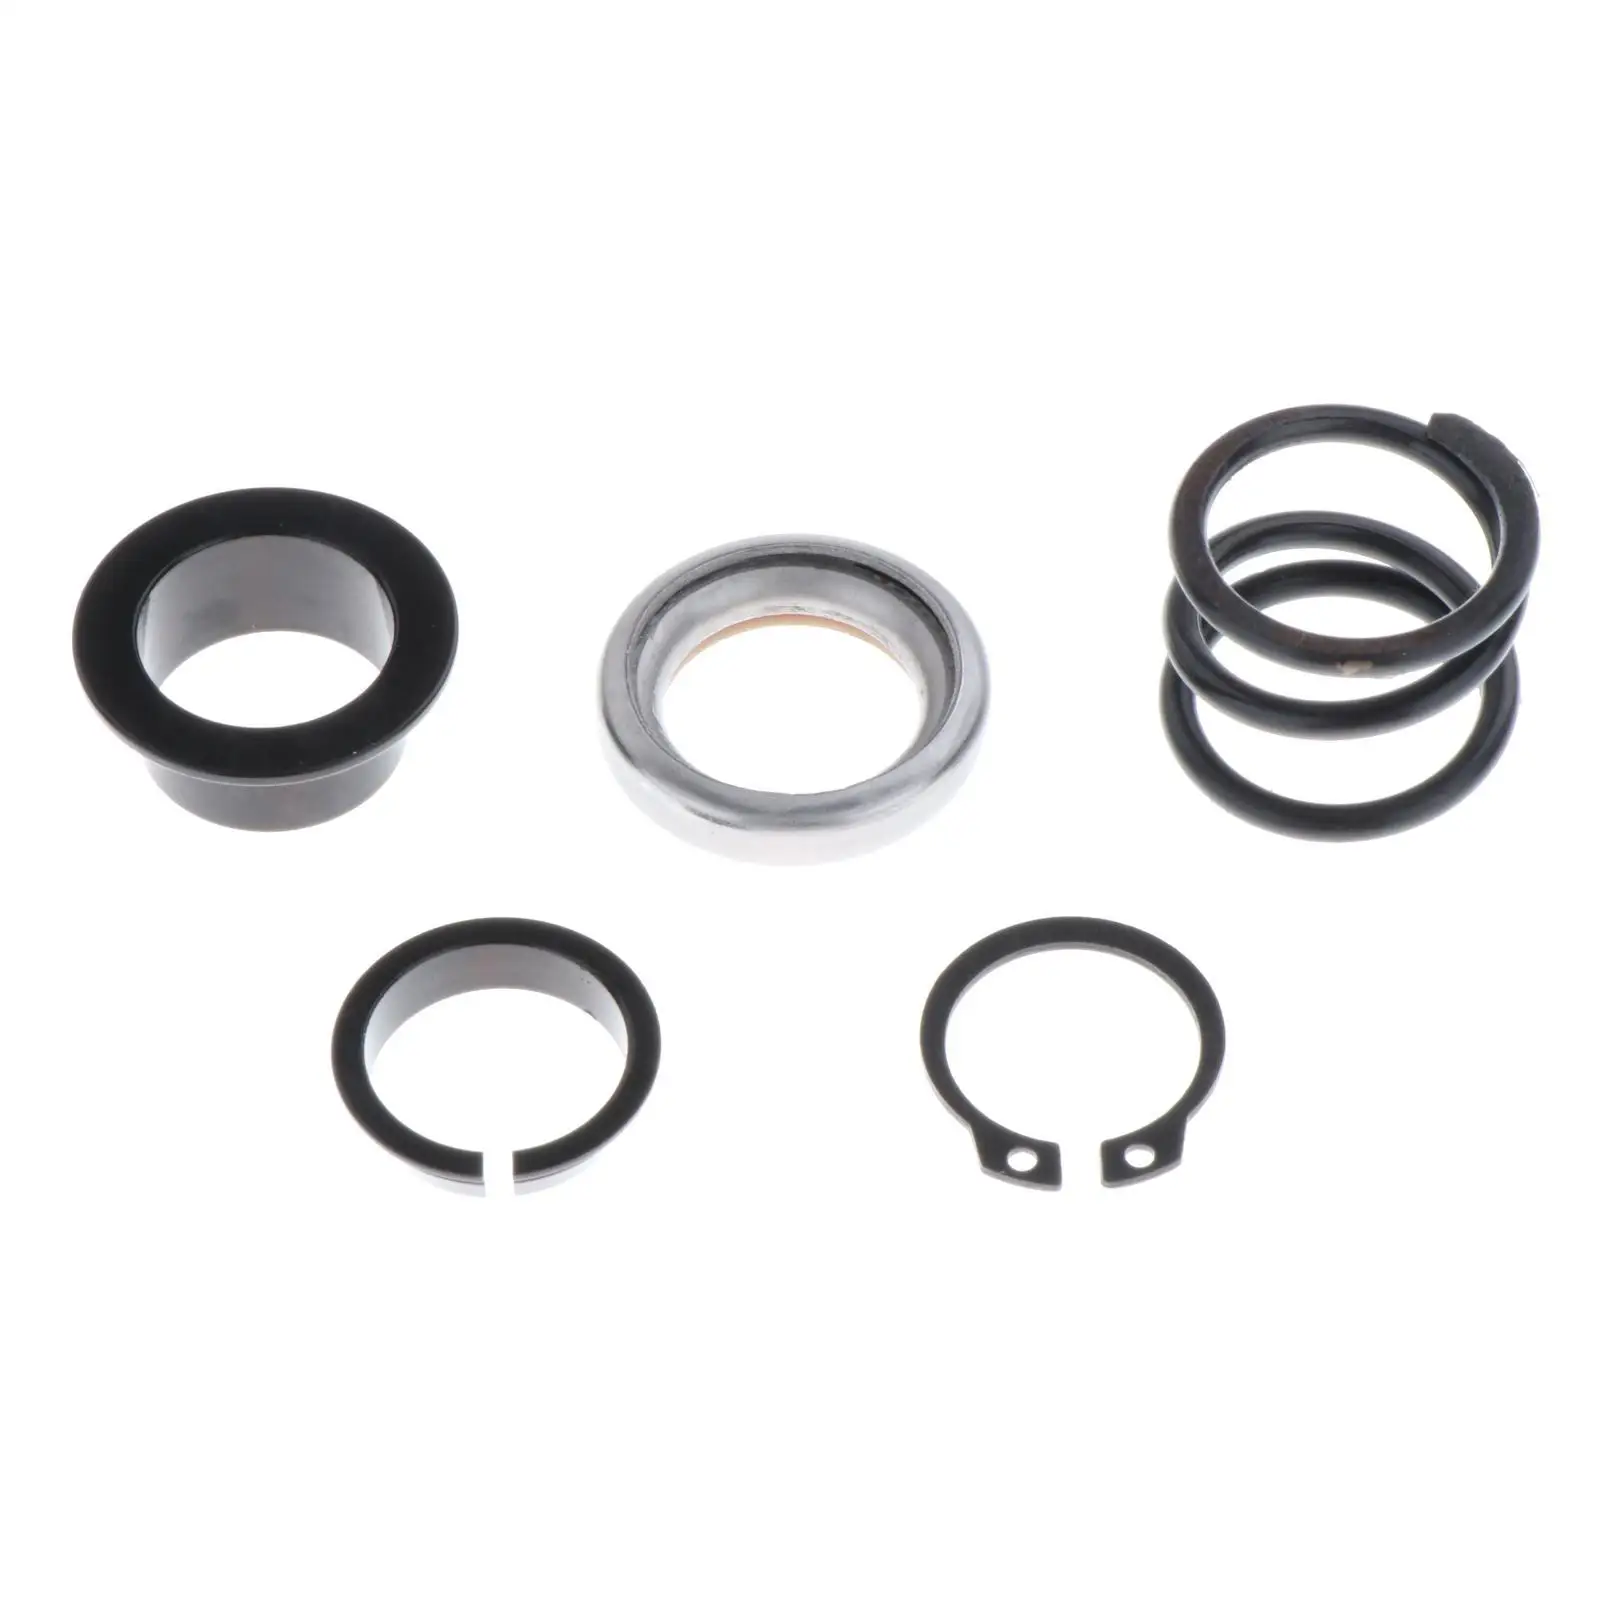 Steering Bearing Kit Accessories Fit for Ford Mercury Lincoln 1992  up